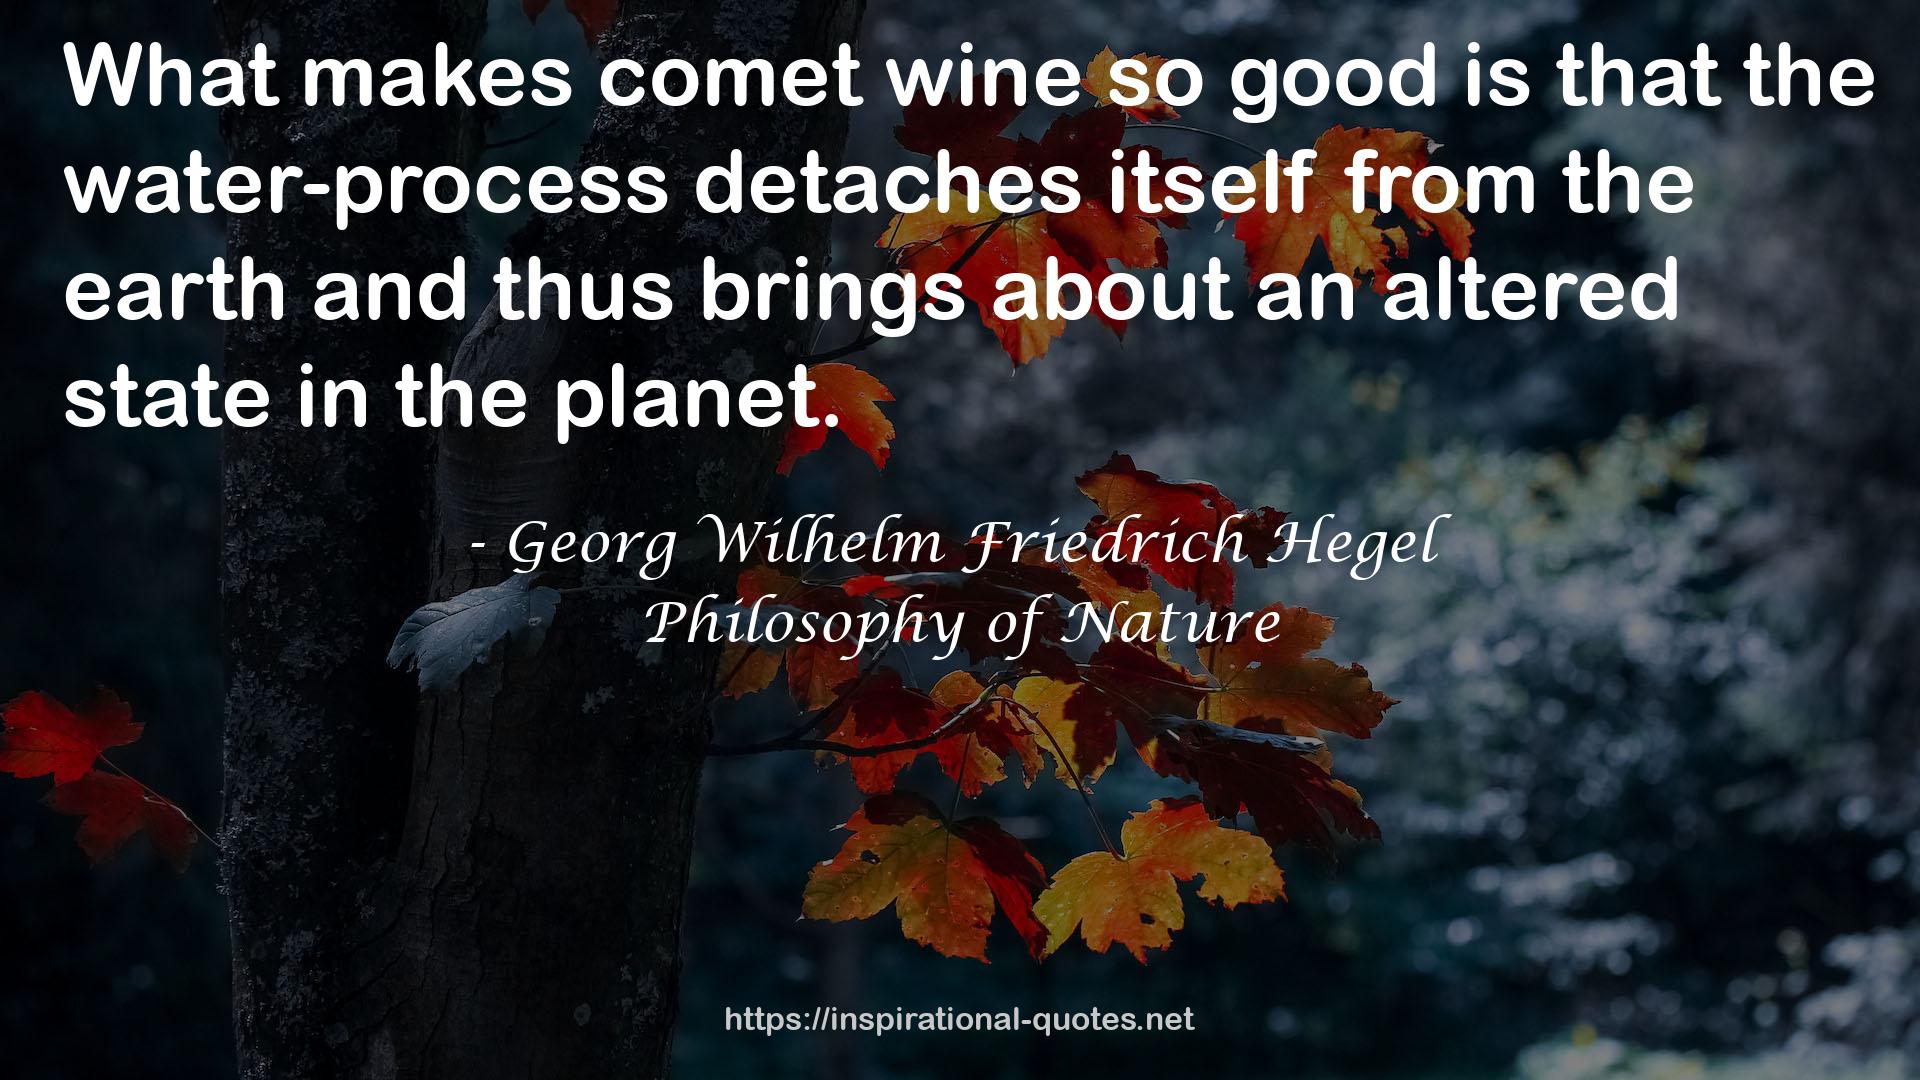 Philosophy of Nature QUOTES